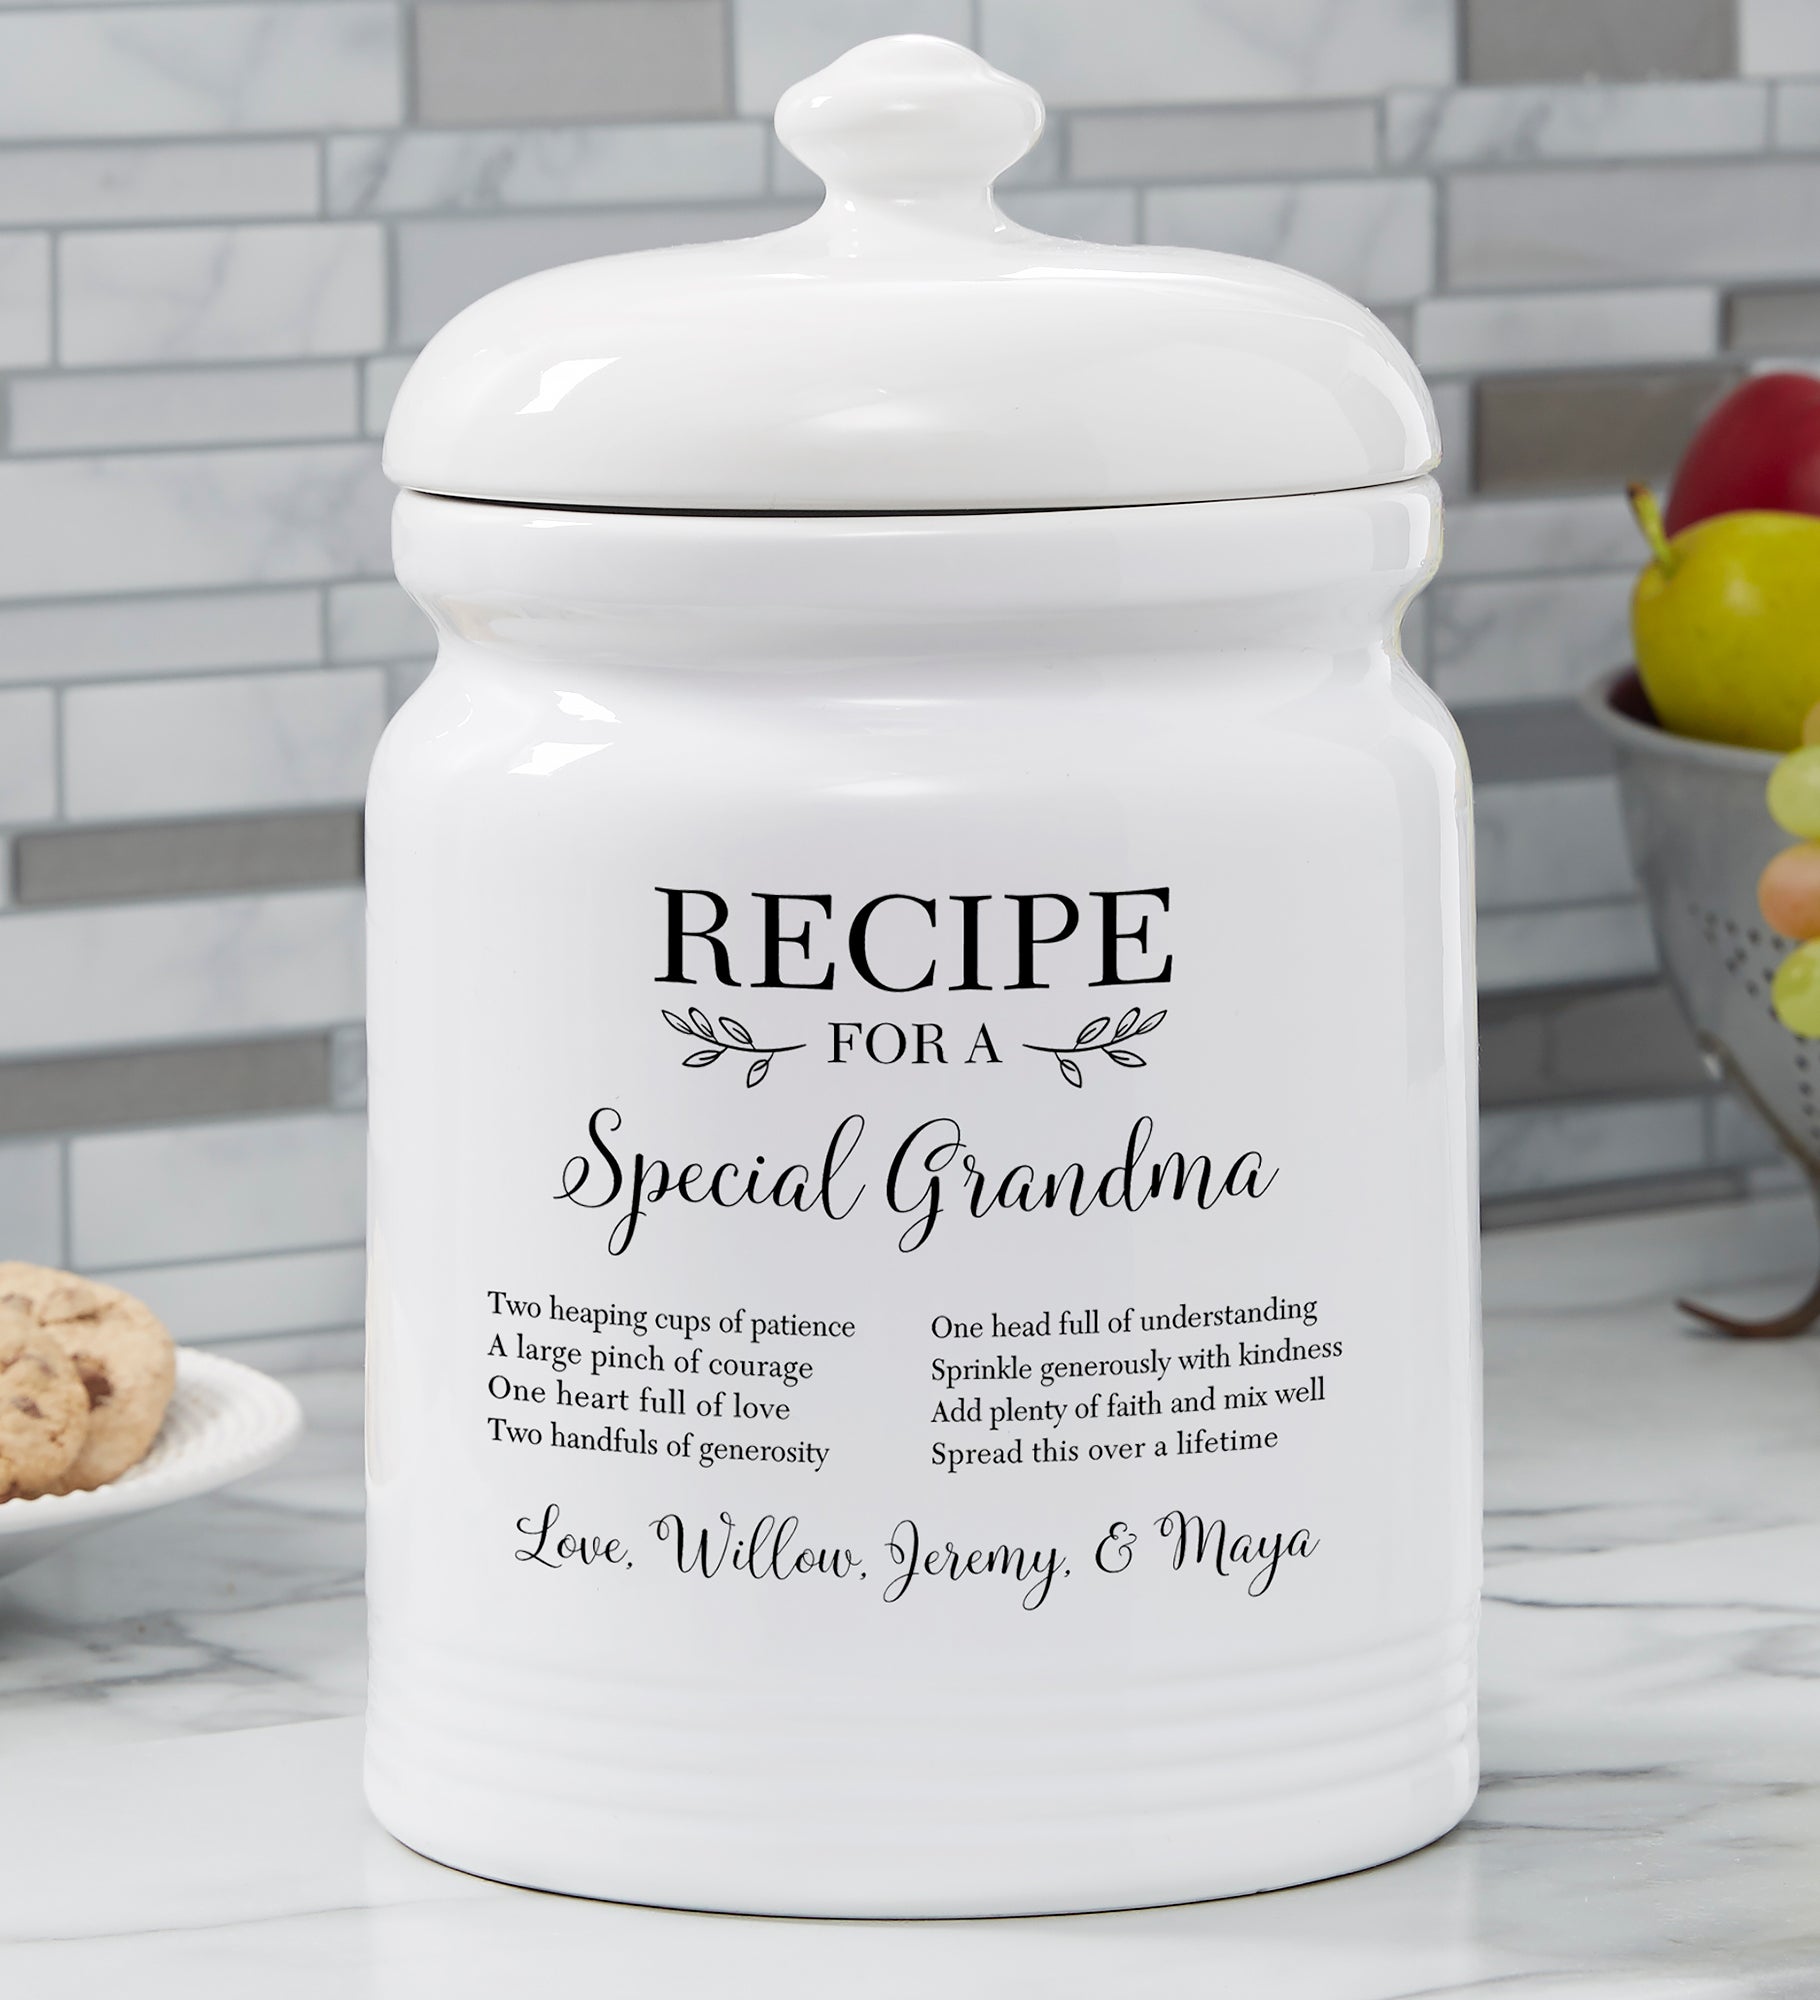 Recipe For a Special Grandma Personalized Cookie Jar